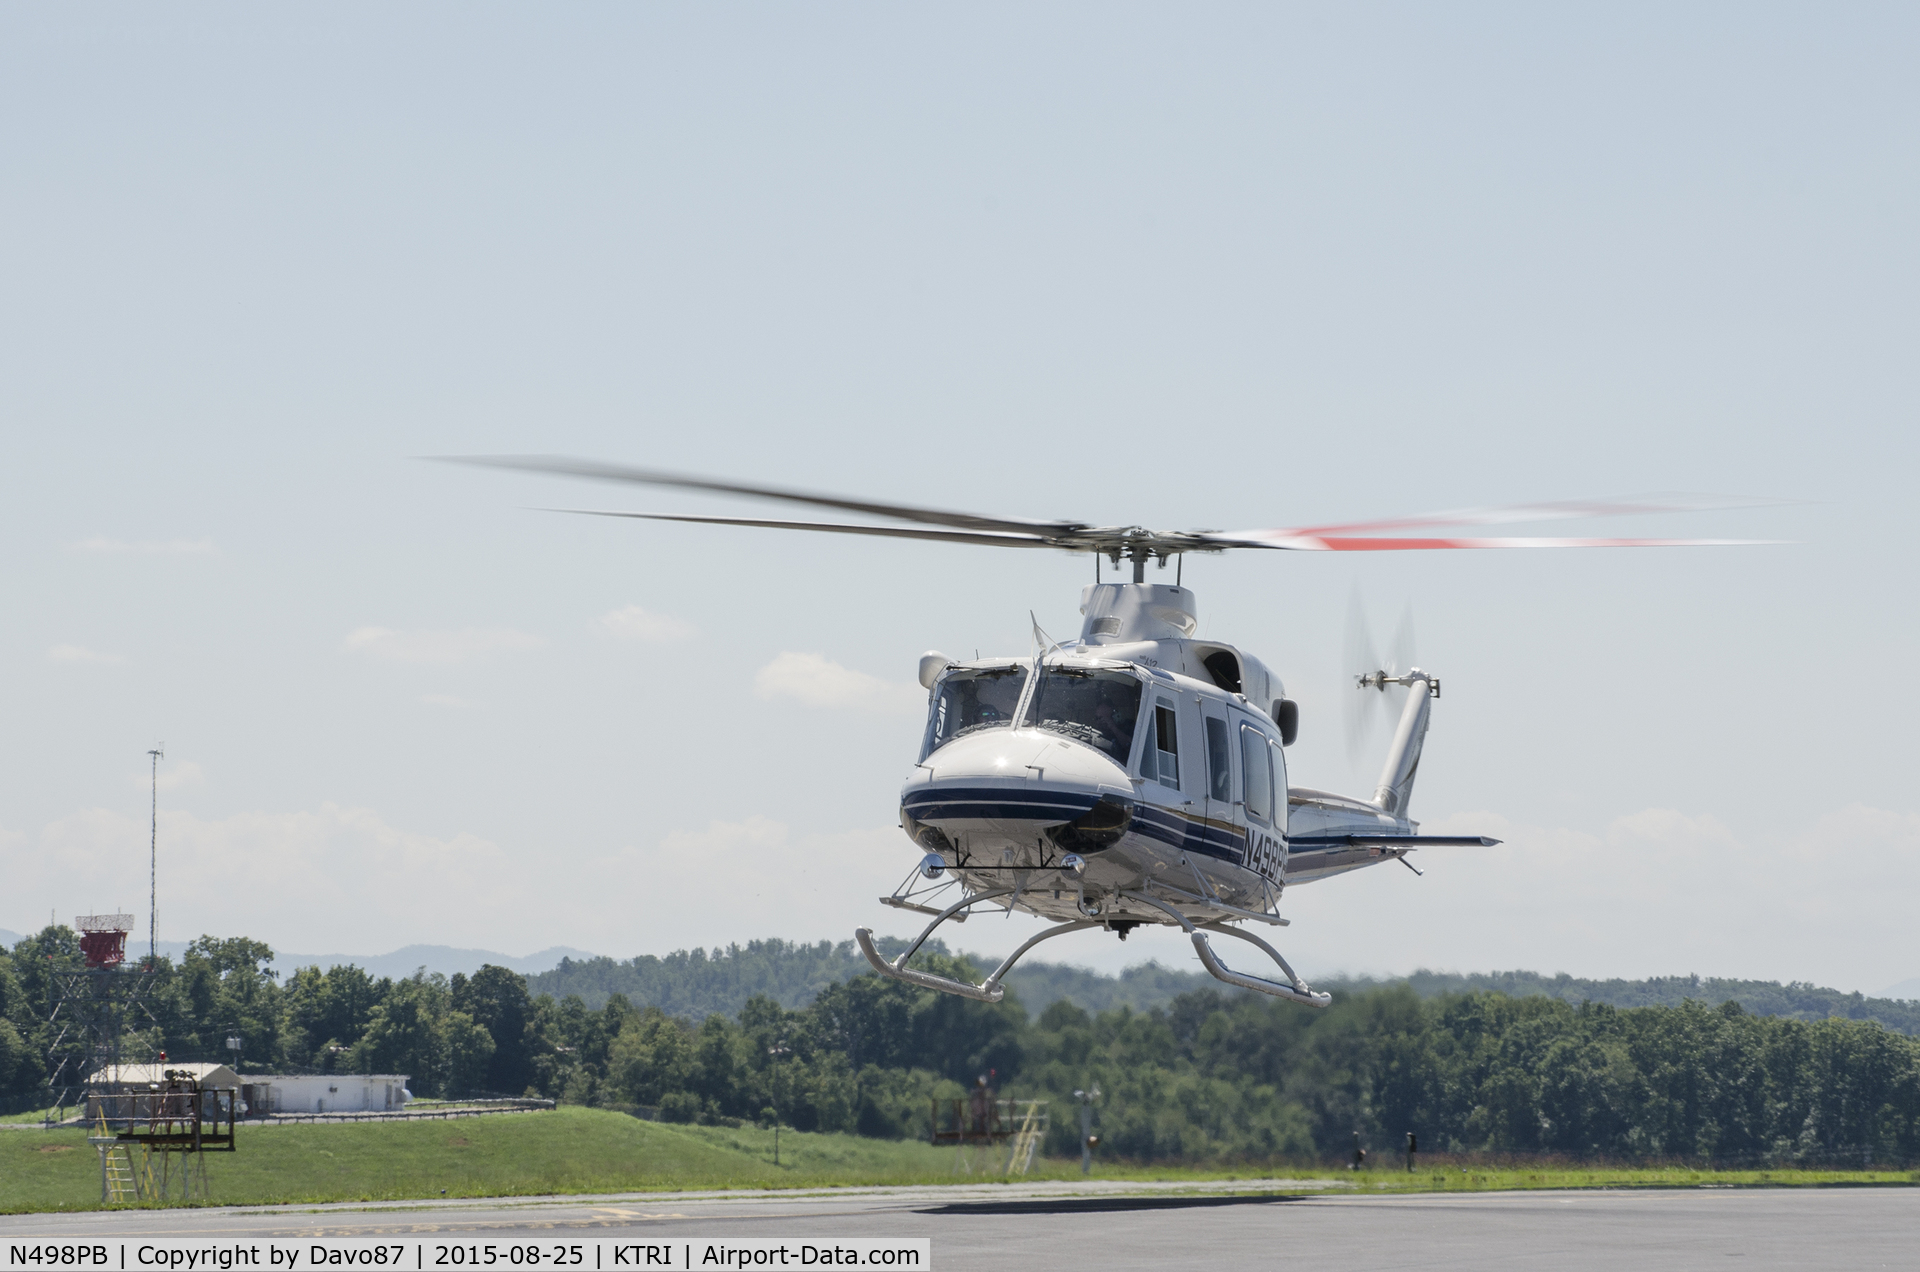 N498PB, 2013 Bell 412EP C/N 36649, Pilots performed multiple spins (left and right) while hovering less than ten feet above the tarmac.